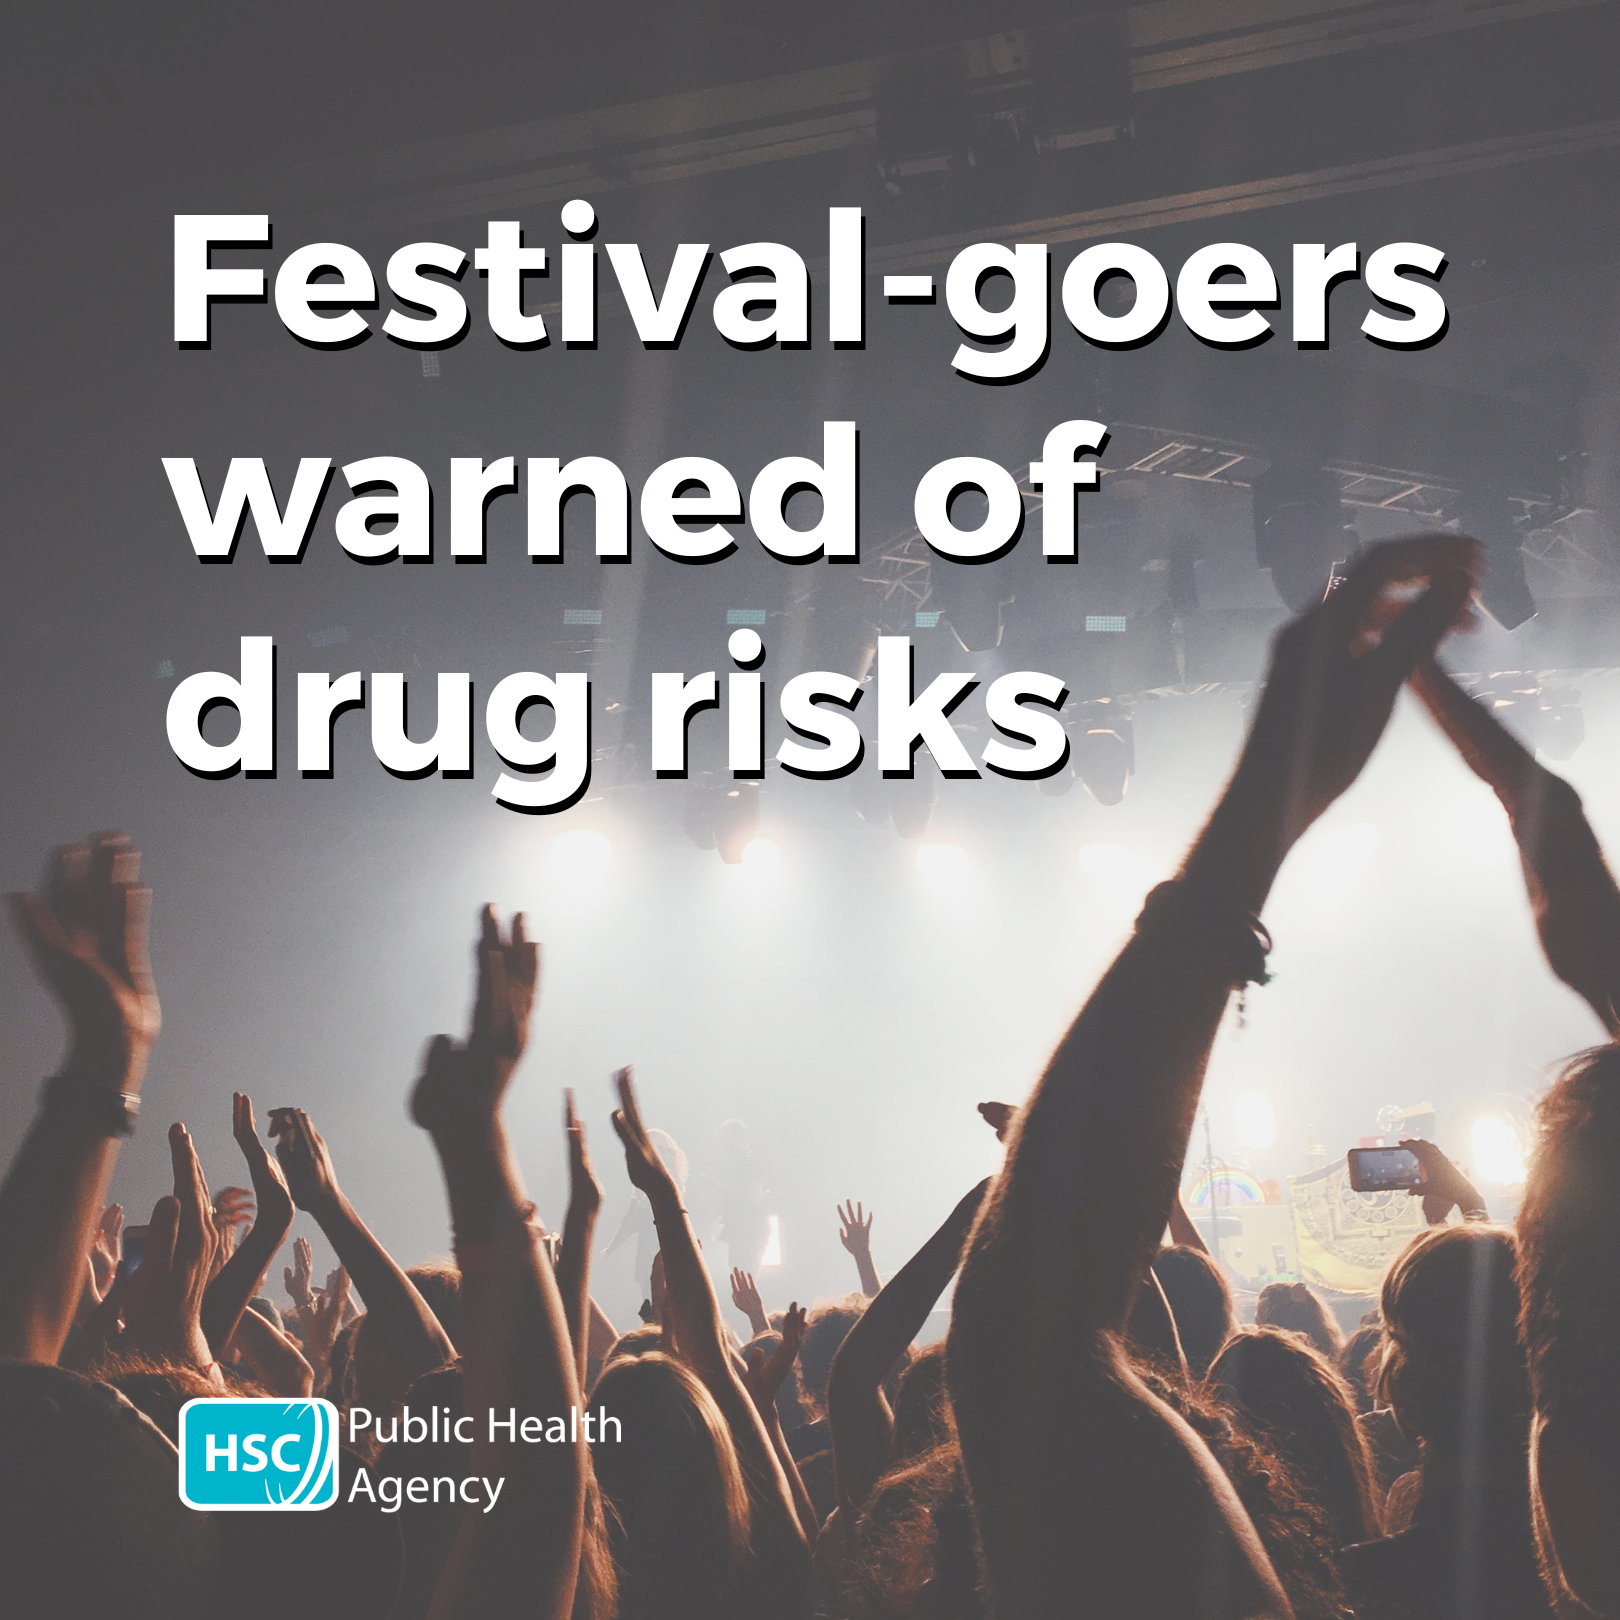 Image of people at a festival at night with text over it saying: "Festival-goers warned of drug risks". With the PHA logo at the bottom